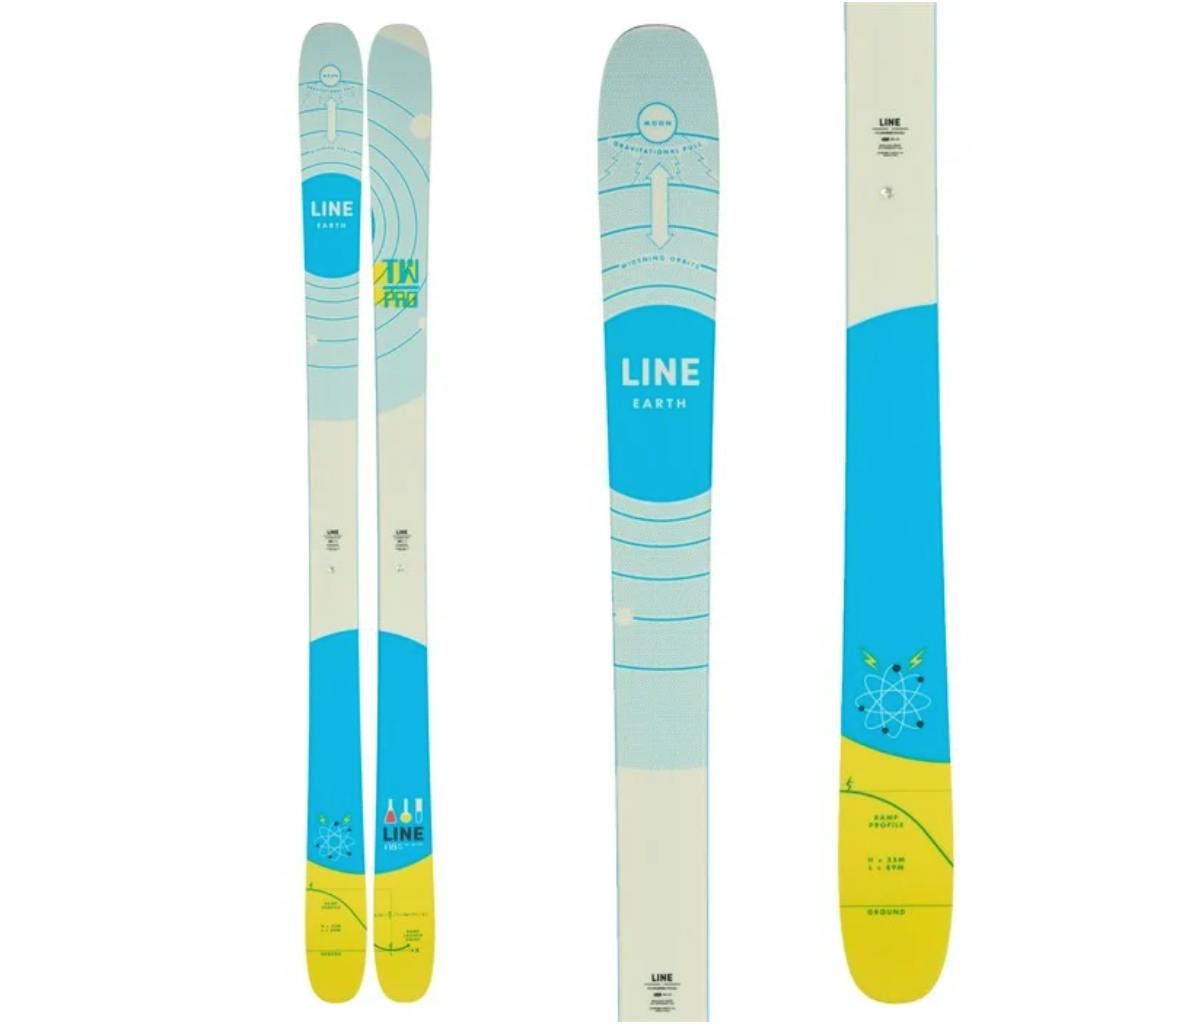 Product image of the 2024 Line Tom Wallisch Pro Skis.